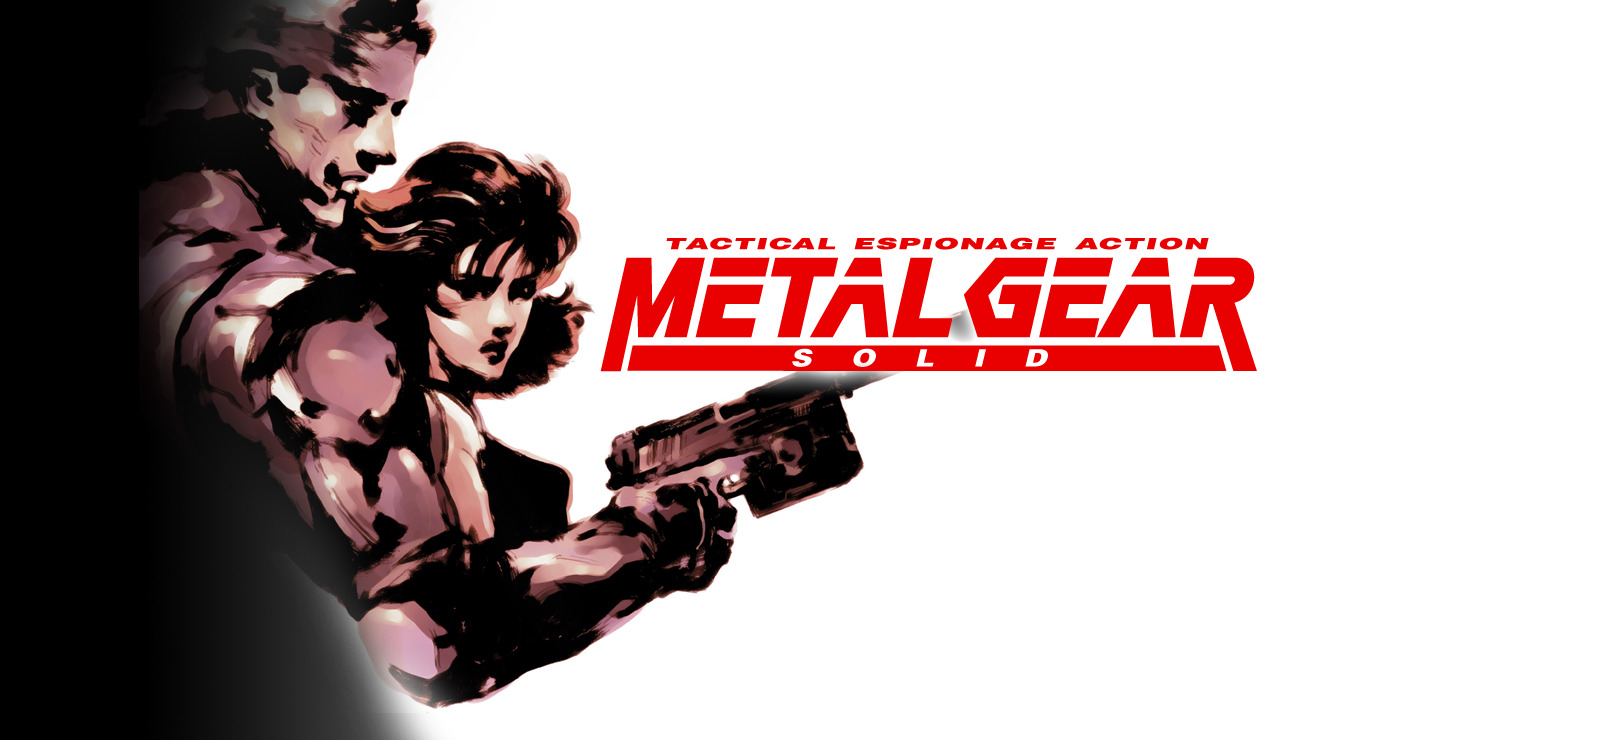 alvin low recommends Metal Gear Solid Pictures